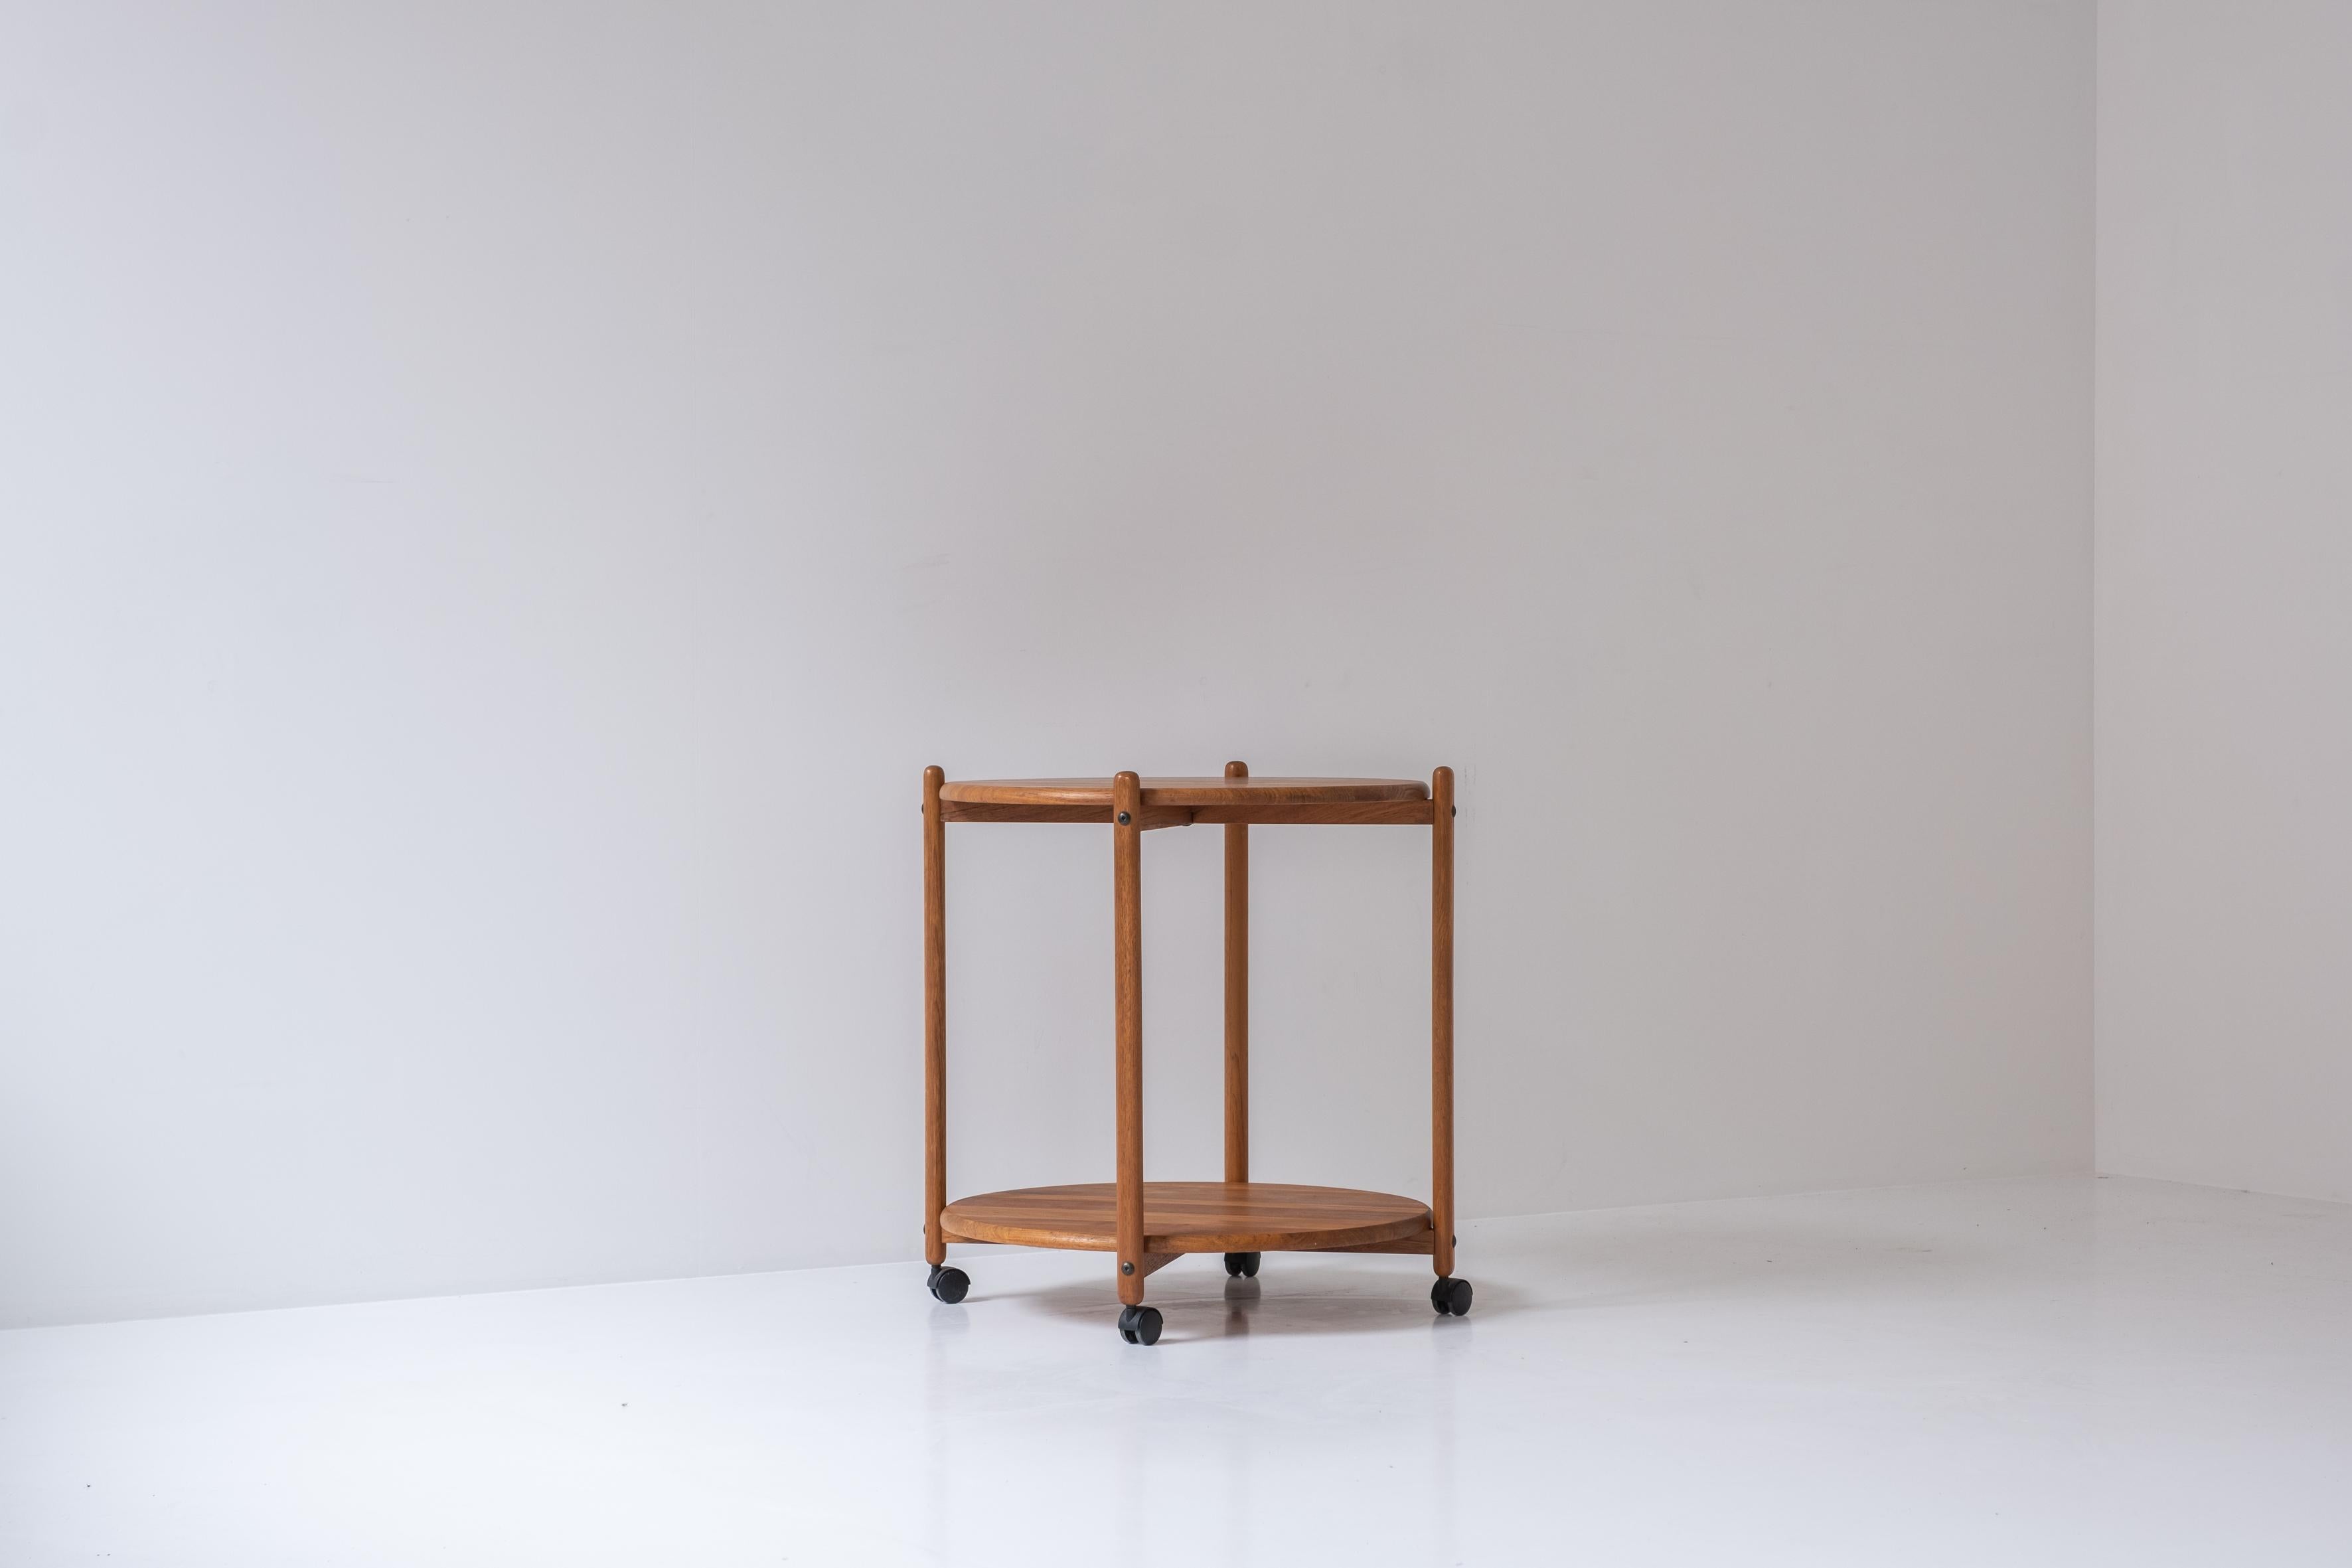 Lovely oak tray table from Denmark, designed in the 1960s. This serving trolley features a frame made out of oak and two oak trays. The base is foldable. Good original condition.